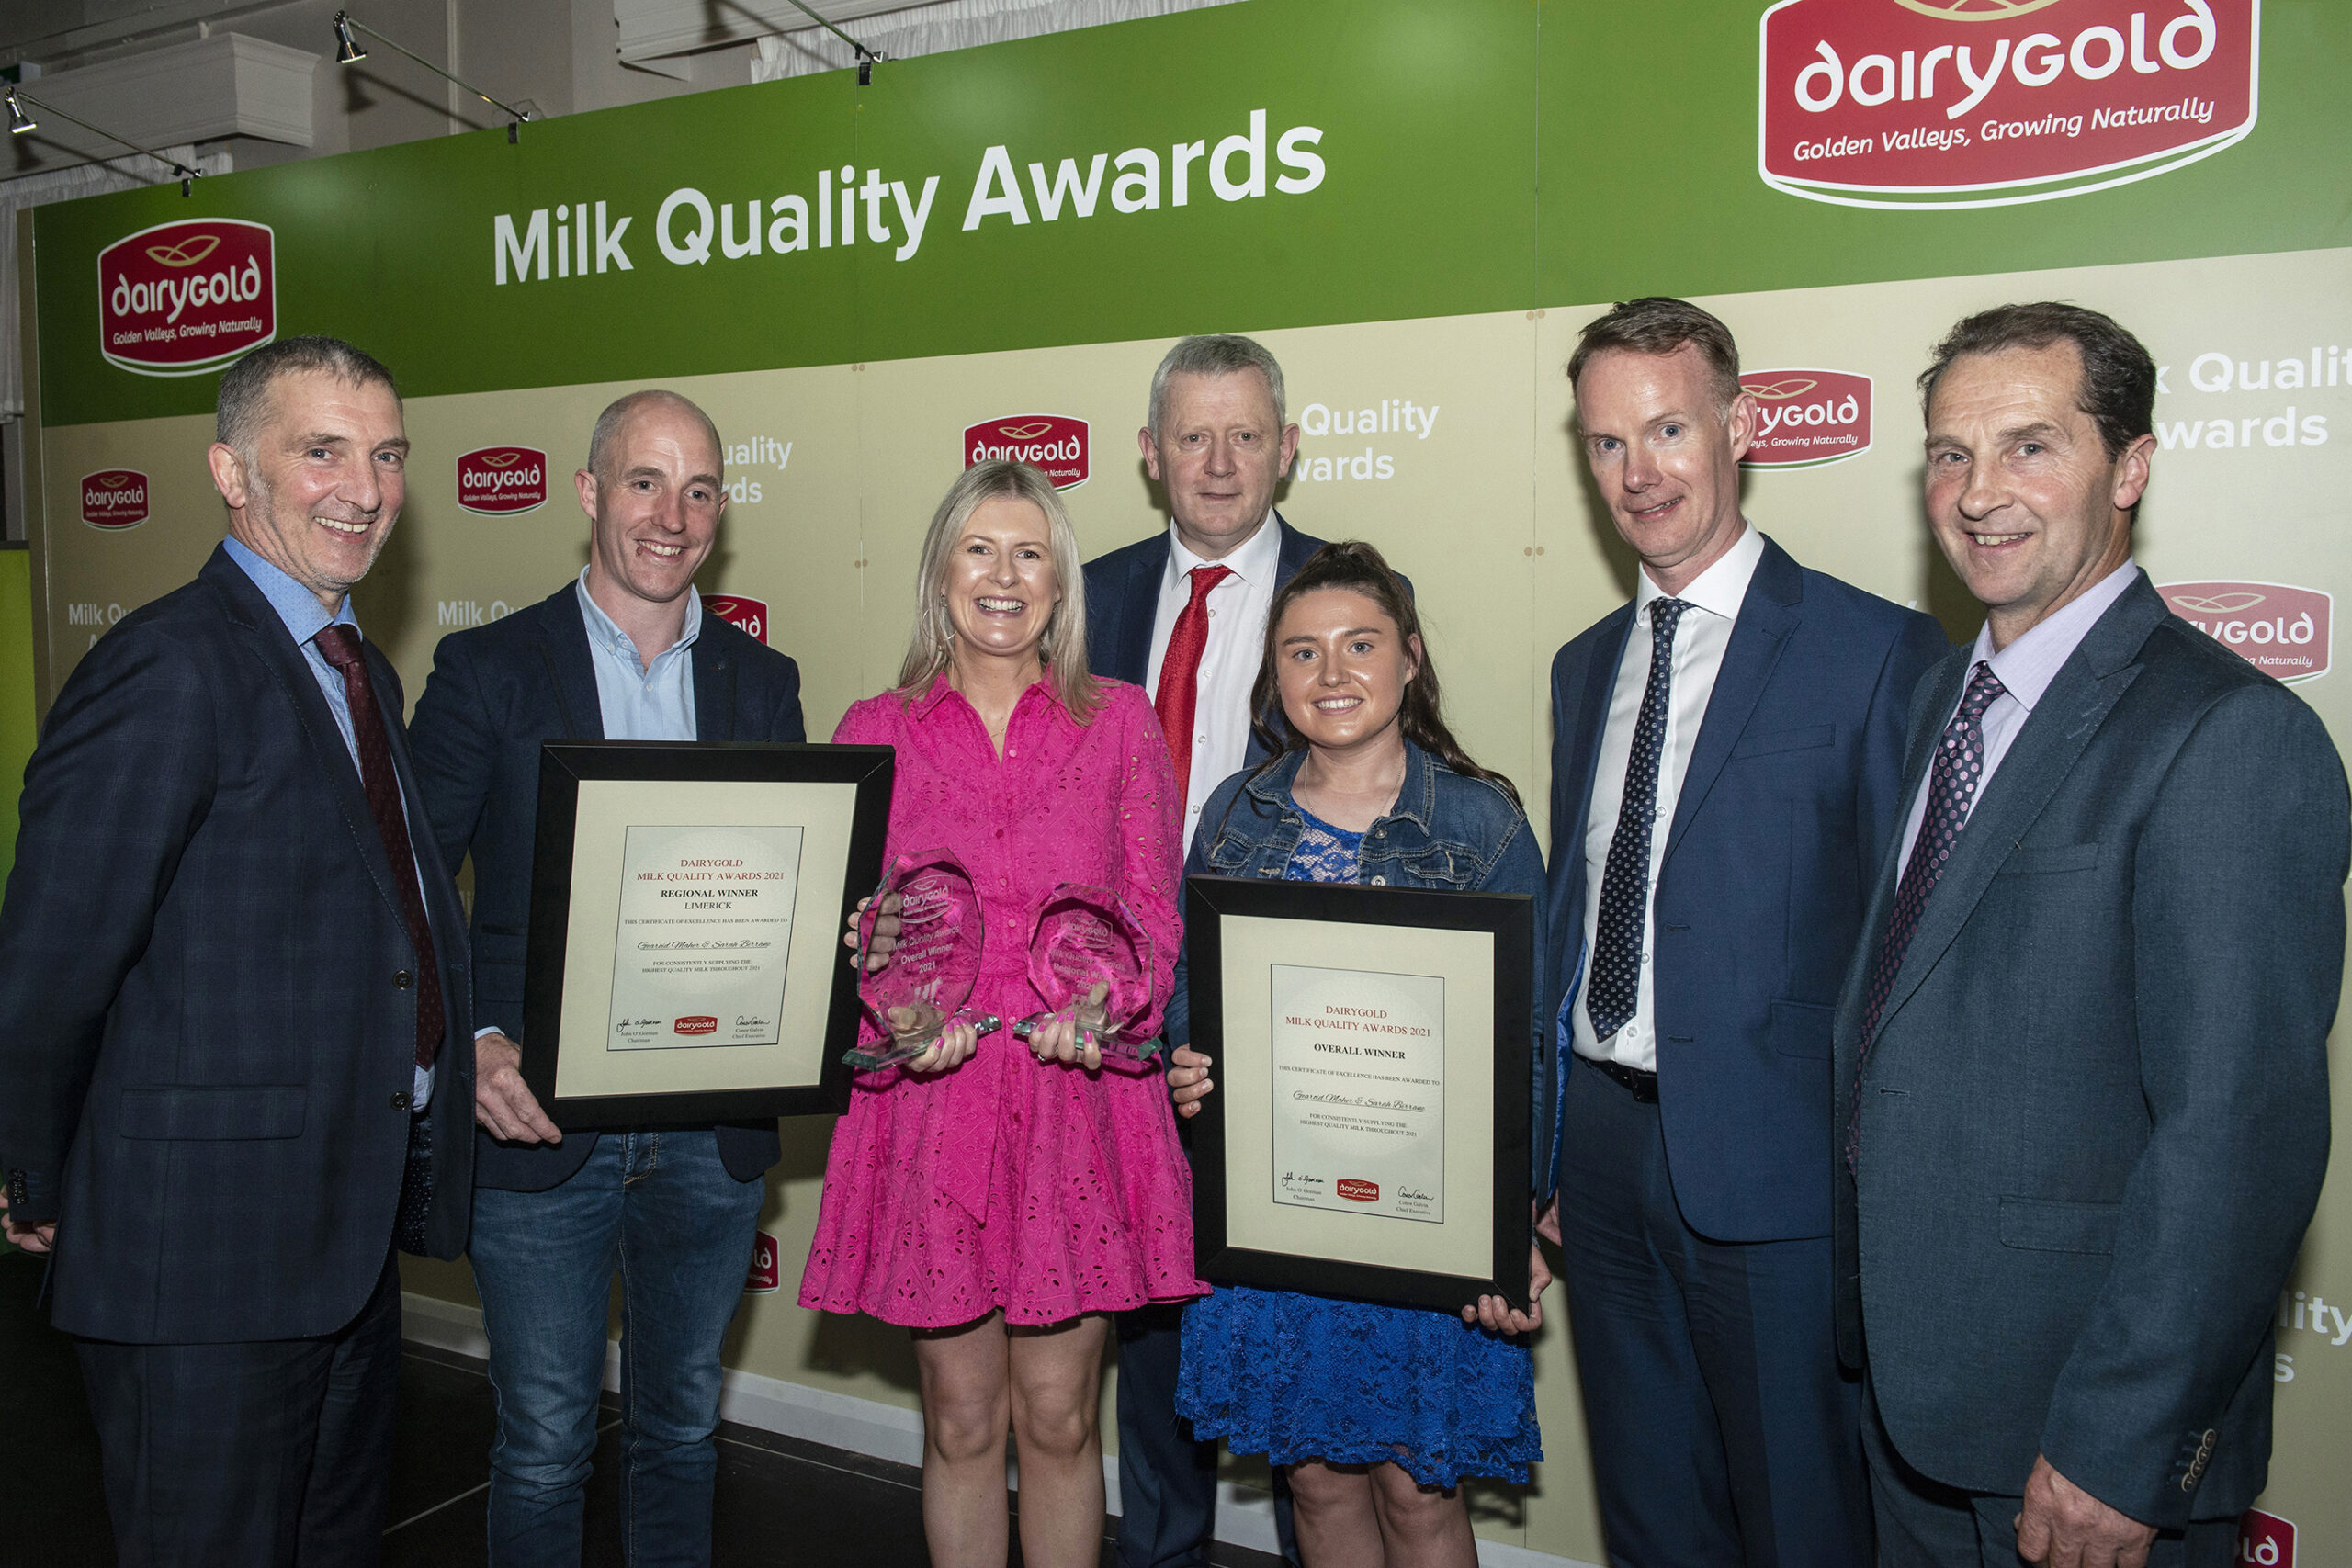 Dairygold announces winners of its annual Milk Quality Awards